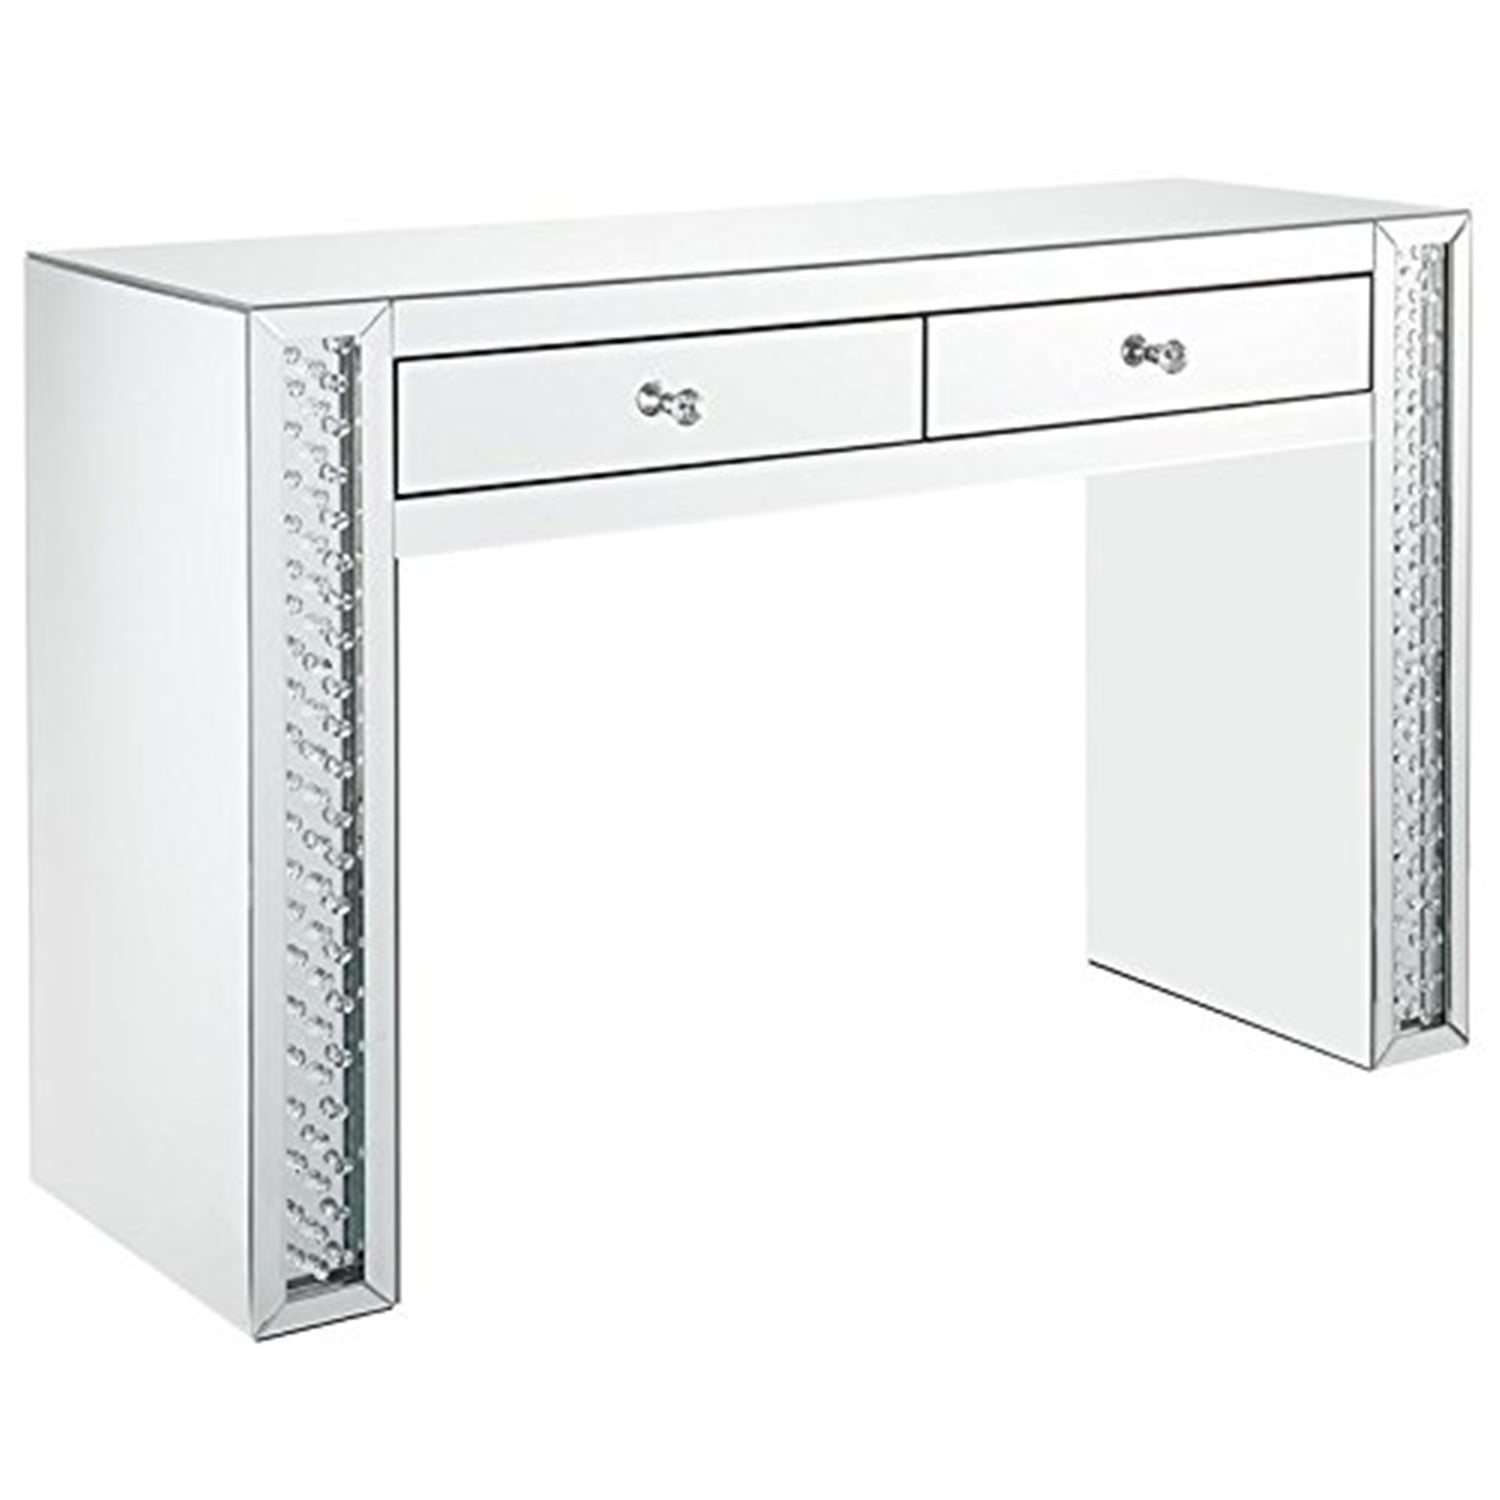 Picture of ACME 90157 Nysa Vanity Desk - Mirrored & Faux Crystals - 31 x 47 x 16 in.